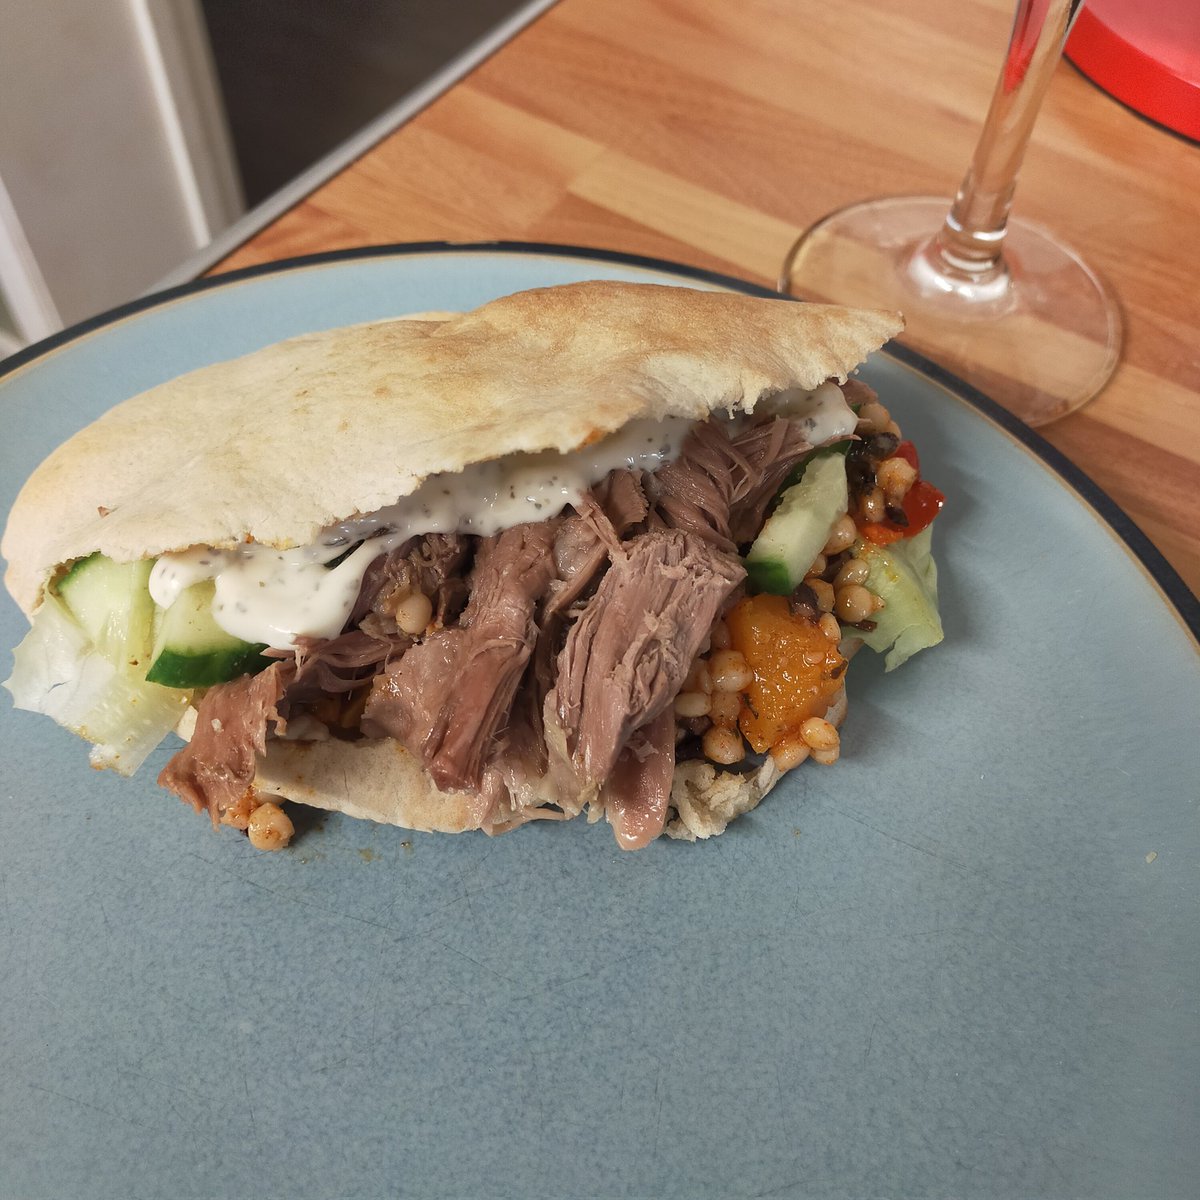 Our 8hr slow roasted Oakes lamb with @AldiUK feta, lemon and giant couscous 😋 match made in heaven  #supportlocal #homereared #lovelamb #southdown